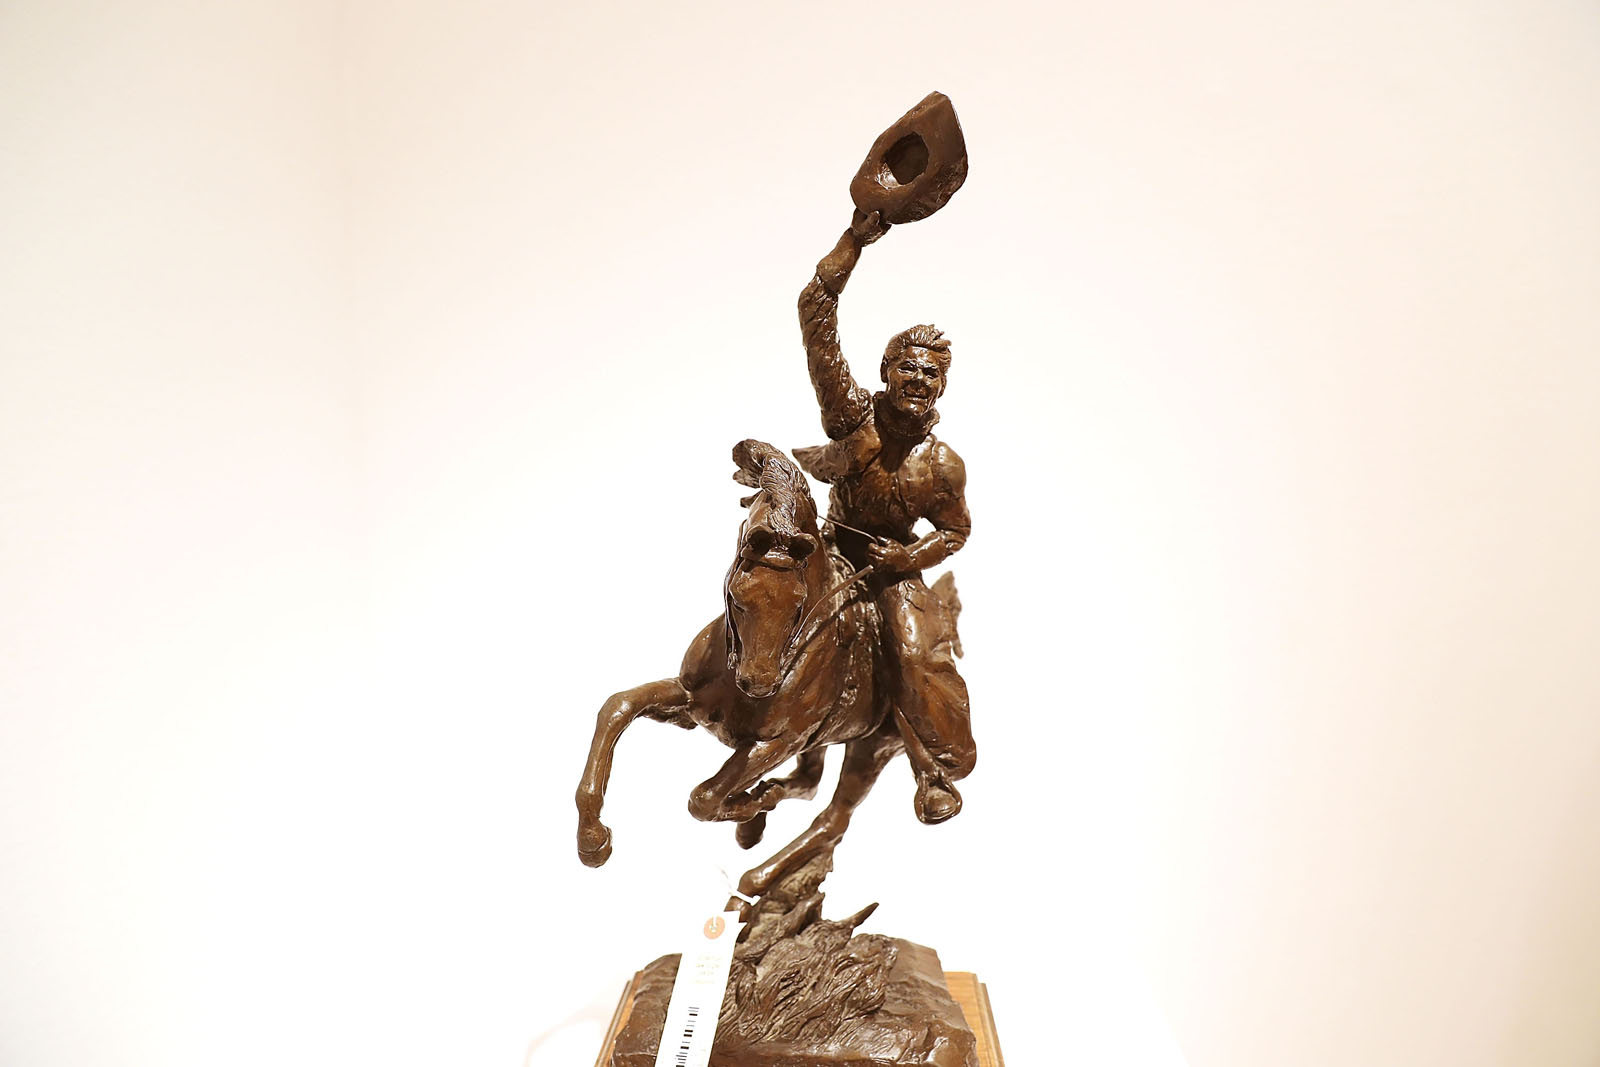 NEW YORK, NY - SEPTEMBER 16:  A bronze miniture sculpture of Ronald Reagan on a horse is displayed at Christie's where items from the former president and Nancy Reagan's California home are to be auctioned shortly on September 16, 2016 in New York City. Many personal items of the first couple are to be auctioned including "Hollywood Regency"style furniture and light fixtures, decorative works, handbags, porcelain stamped with the presidential seal, jewelry and a pair of Reagan's cowboy boots with the presidential seal. The e-catalog auction, which is expected to generate more than $2 million with individual items ranging from $1,000 to $50,000, goes live at Christie's Monday in New York. Proceeds from the auction will be donated to the Ronald Reagan Presidential Foundation and Institute.  (Photo by Spencer Platt/Getty Images)